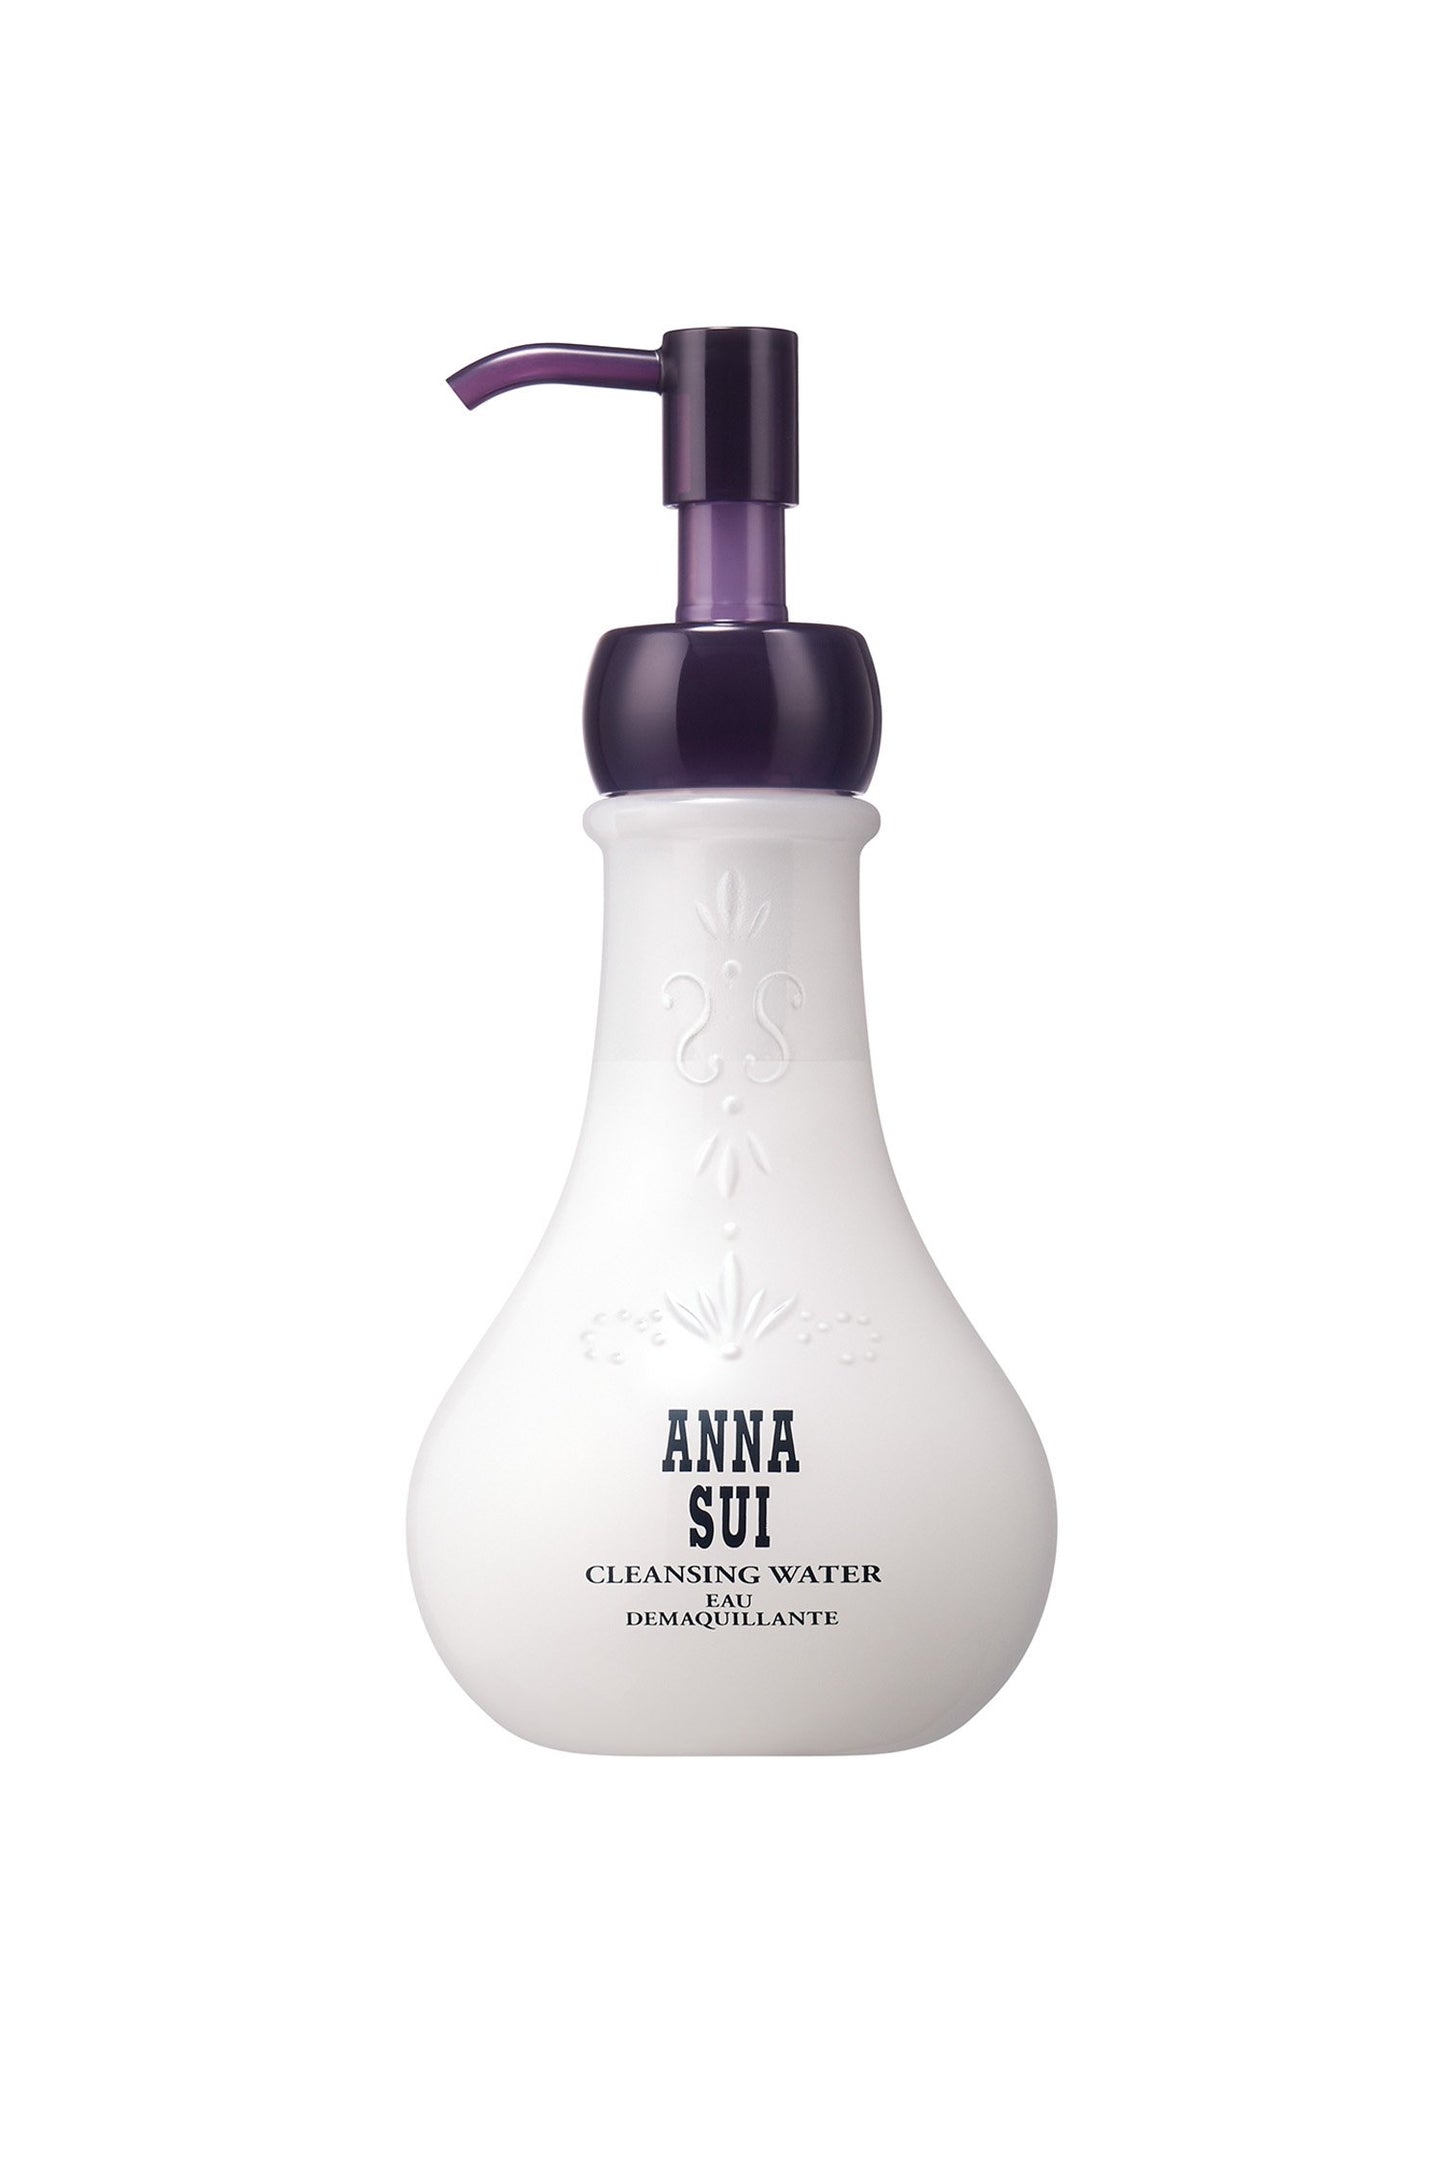 Cleansing water, cream bulb-shaped container, floral design & Anna branding, purple dispenser